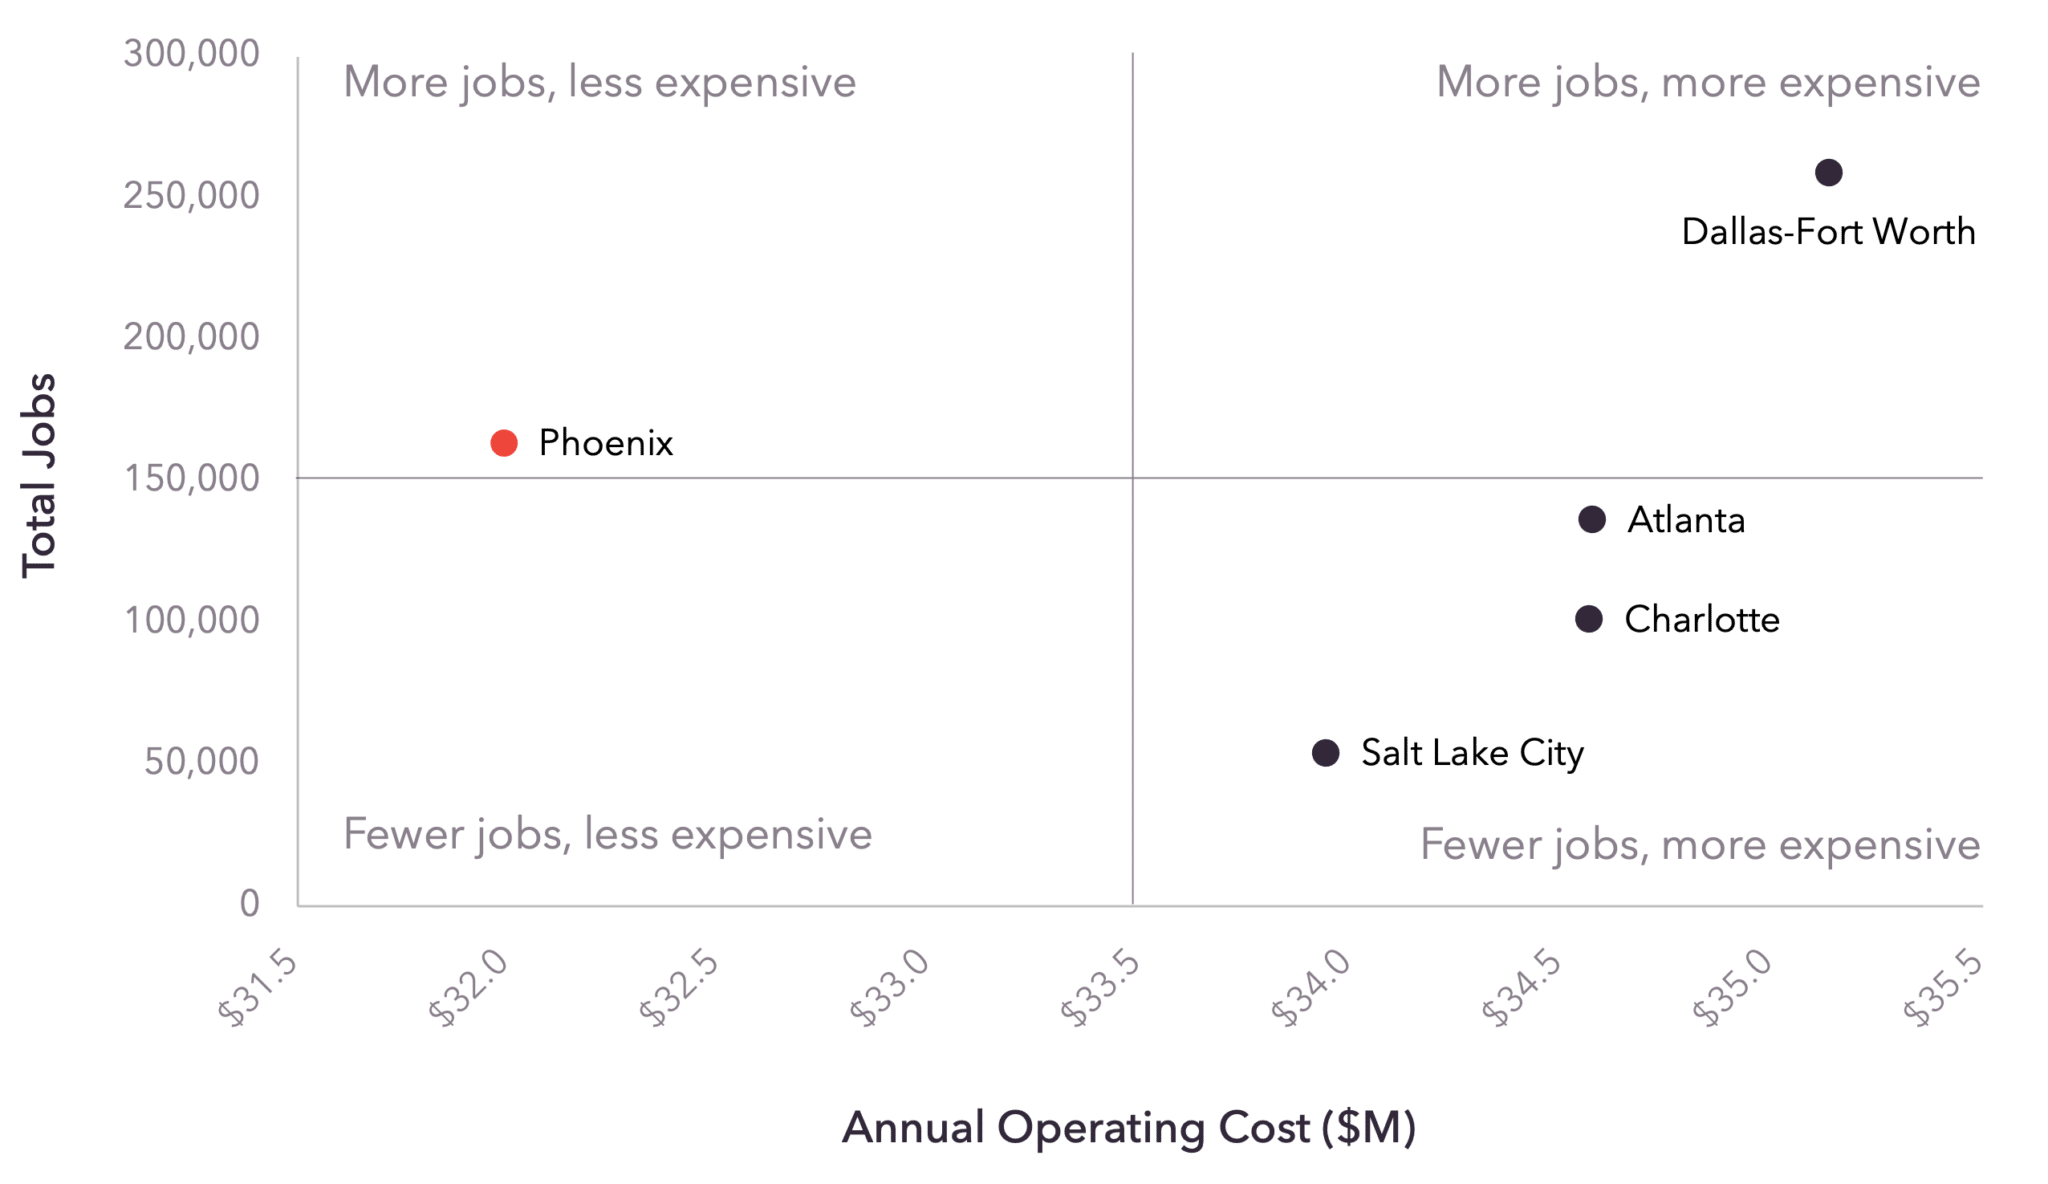 A quadrant graph comparing jobs to operating costs for the insurance industry of five U.S. markets. Greater Phoenix is less expensive, more jobs quadrant while Salt Lake City, Charlotte and Atlanta are in the fewer jobs, more expensive quadrant and Dallas-Fort Worth is in the more jobs, more expensive section.